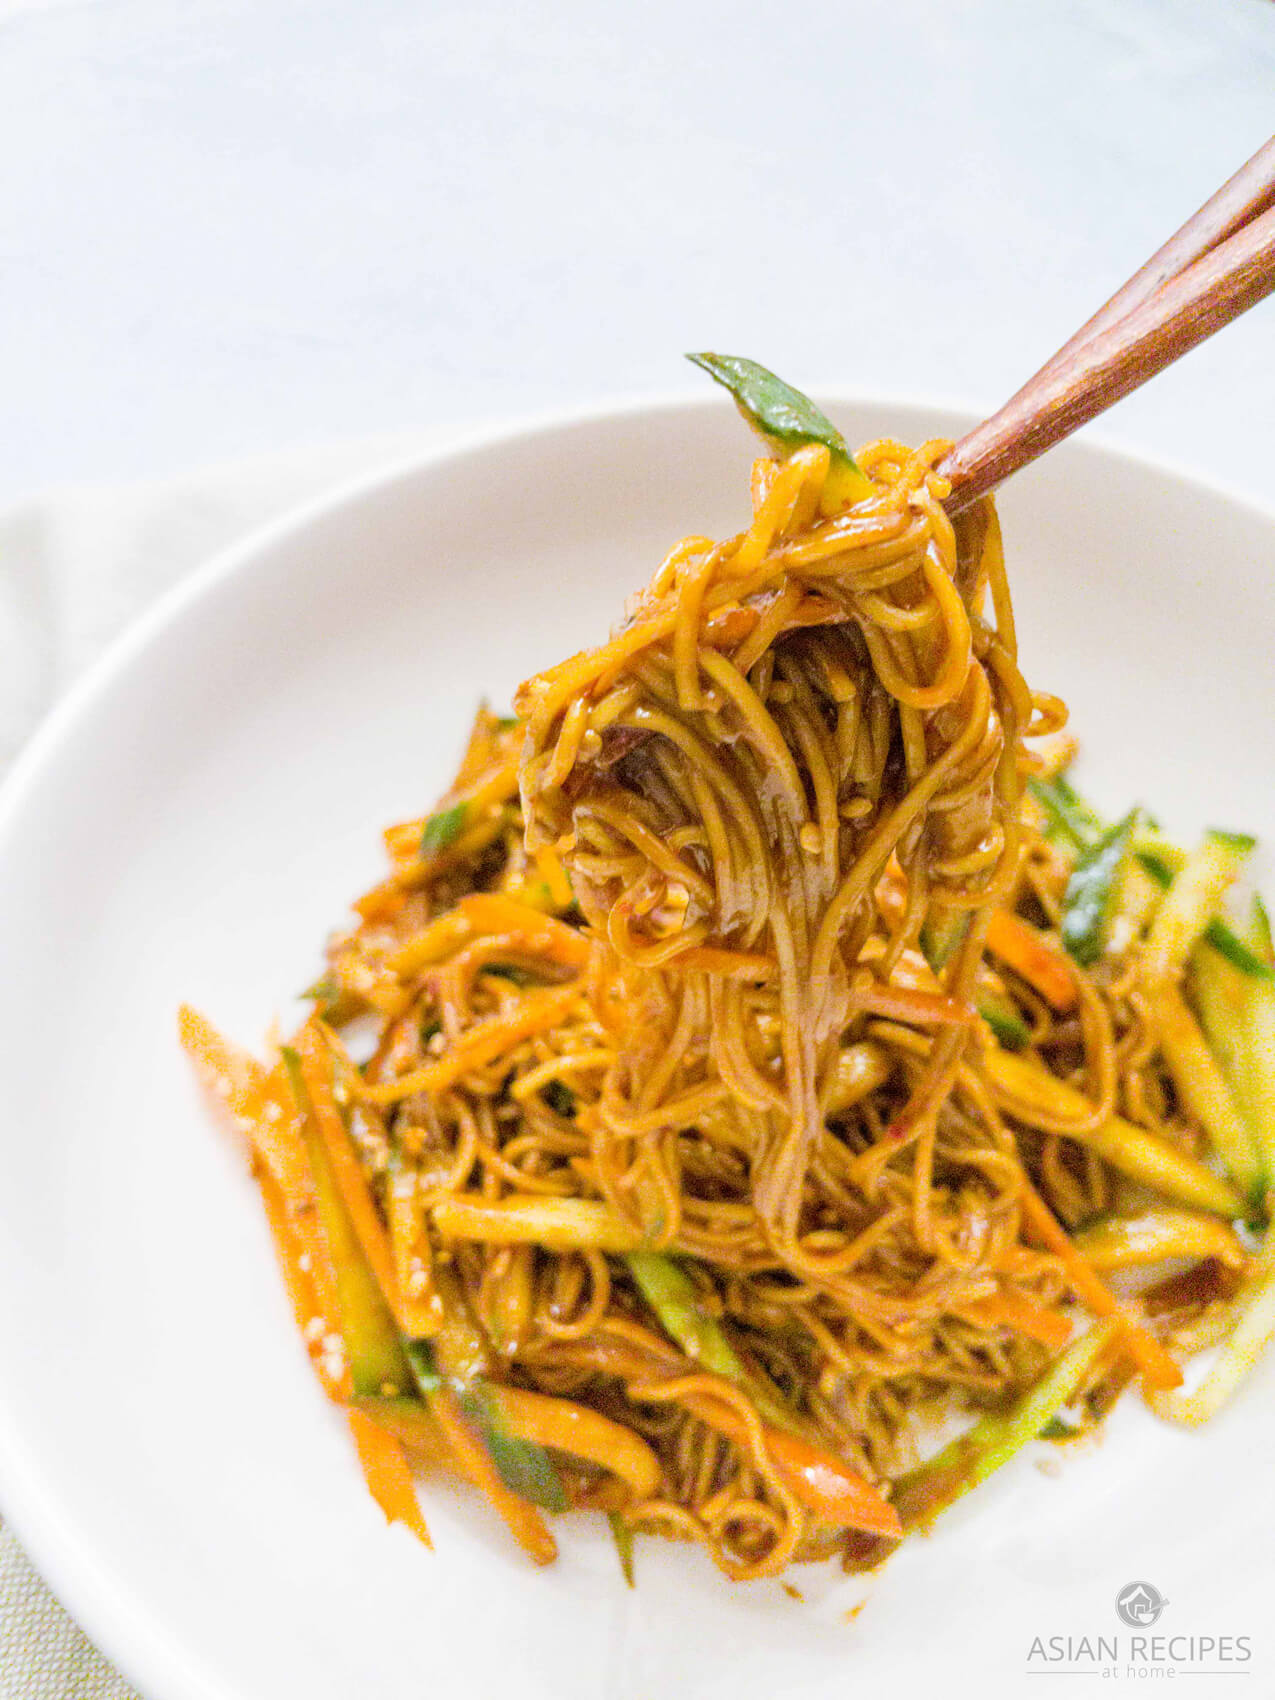 Noodles covered in a spicy gochujang sauce is the perfect cold noodle bowl to have during Summer!